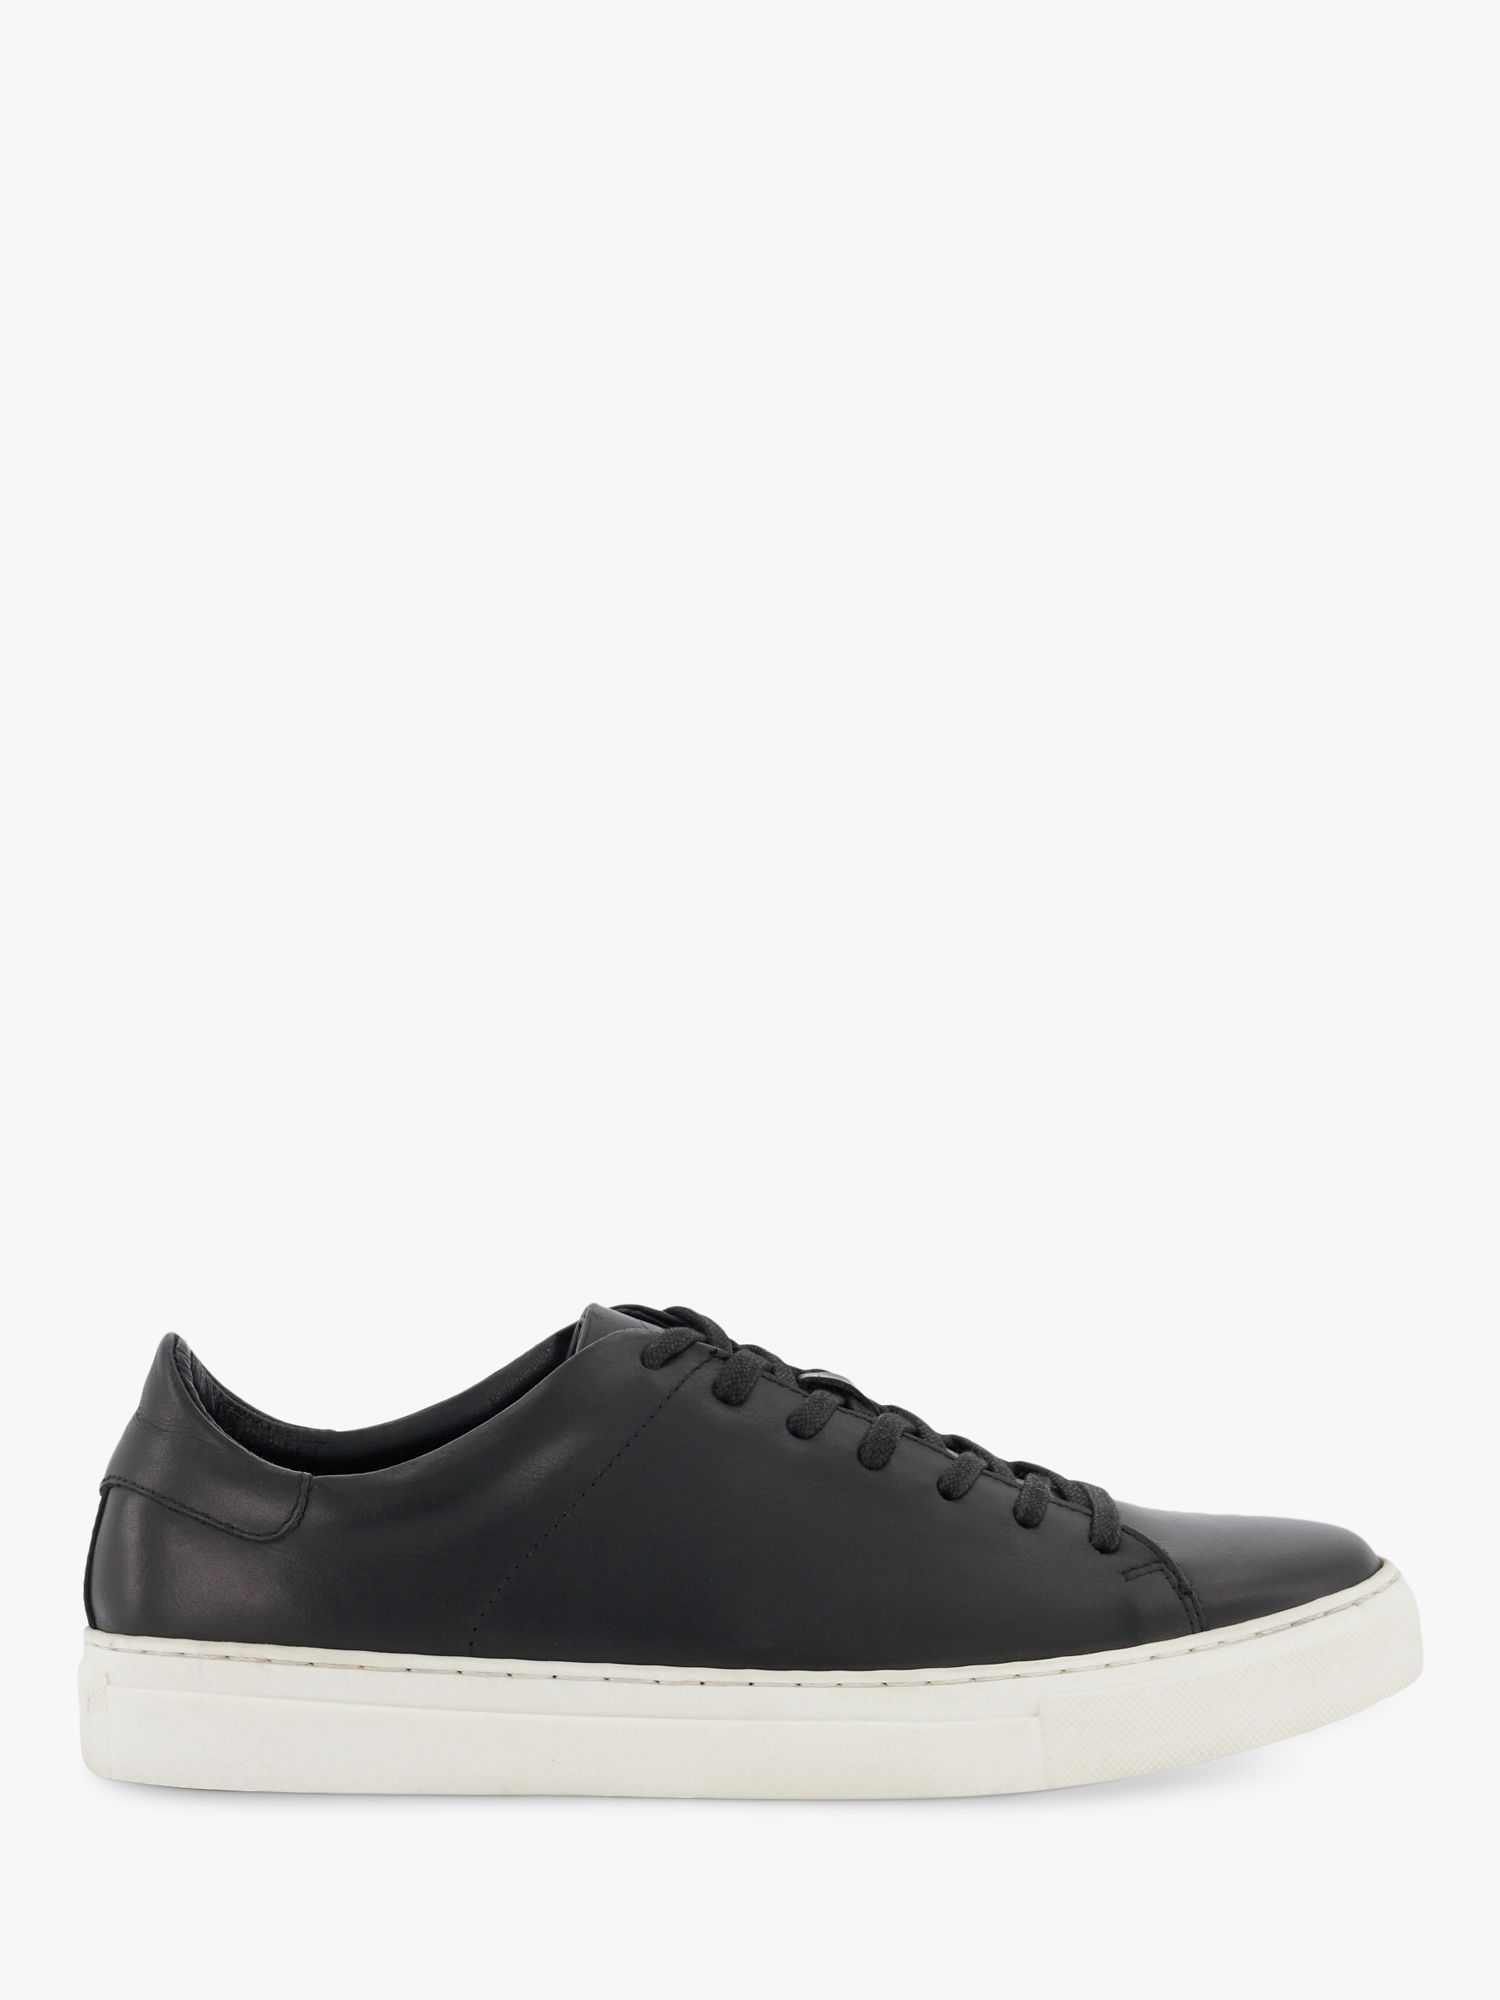 Dune Terrence Cupsole Trainers, Black